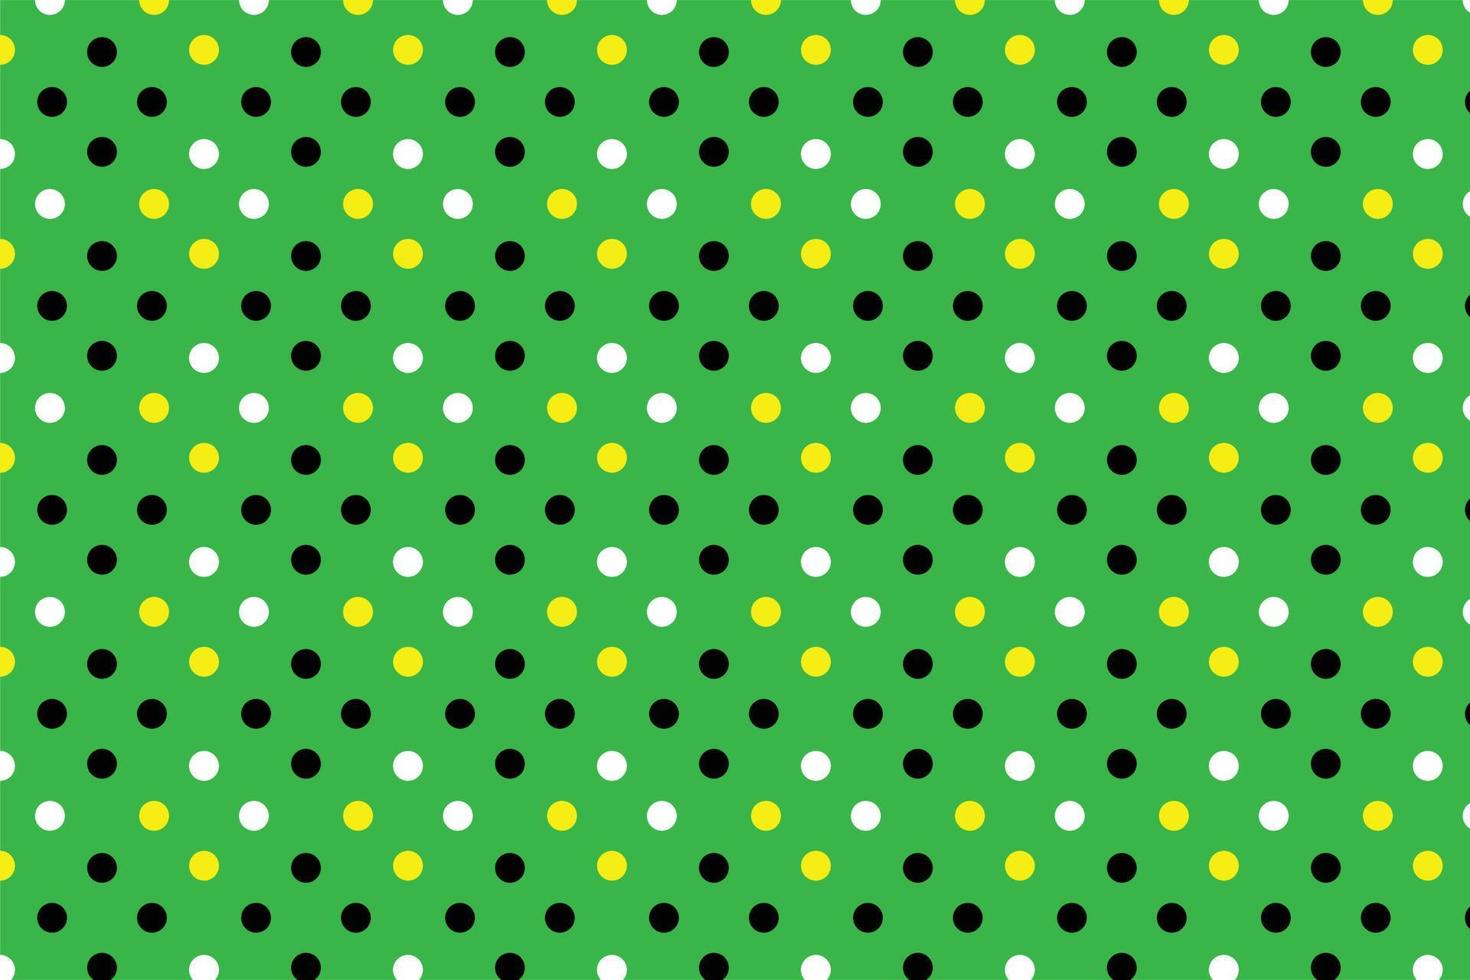 abstract white black and yellow on green background design. vector